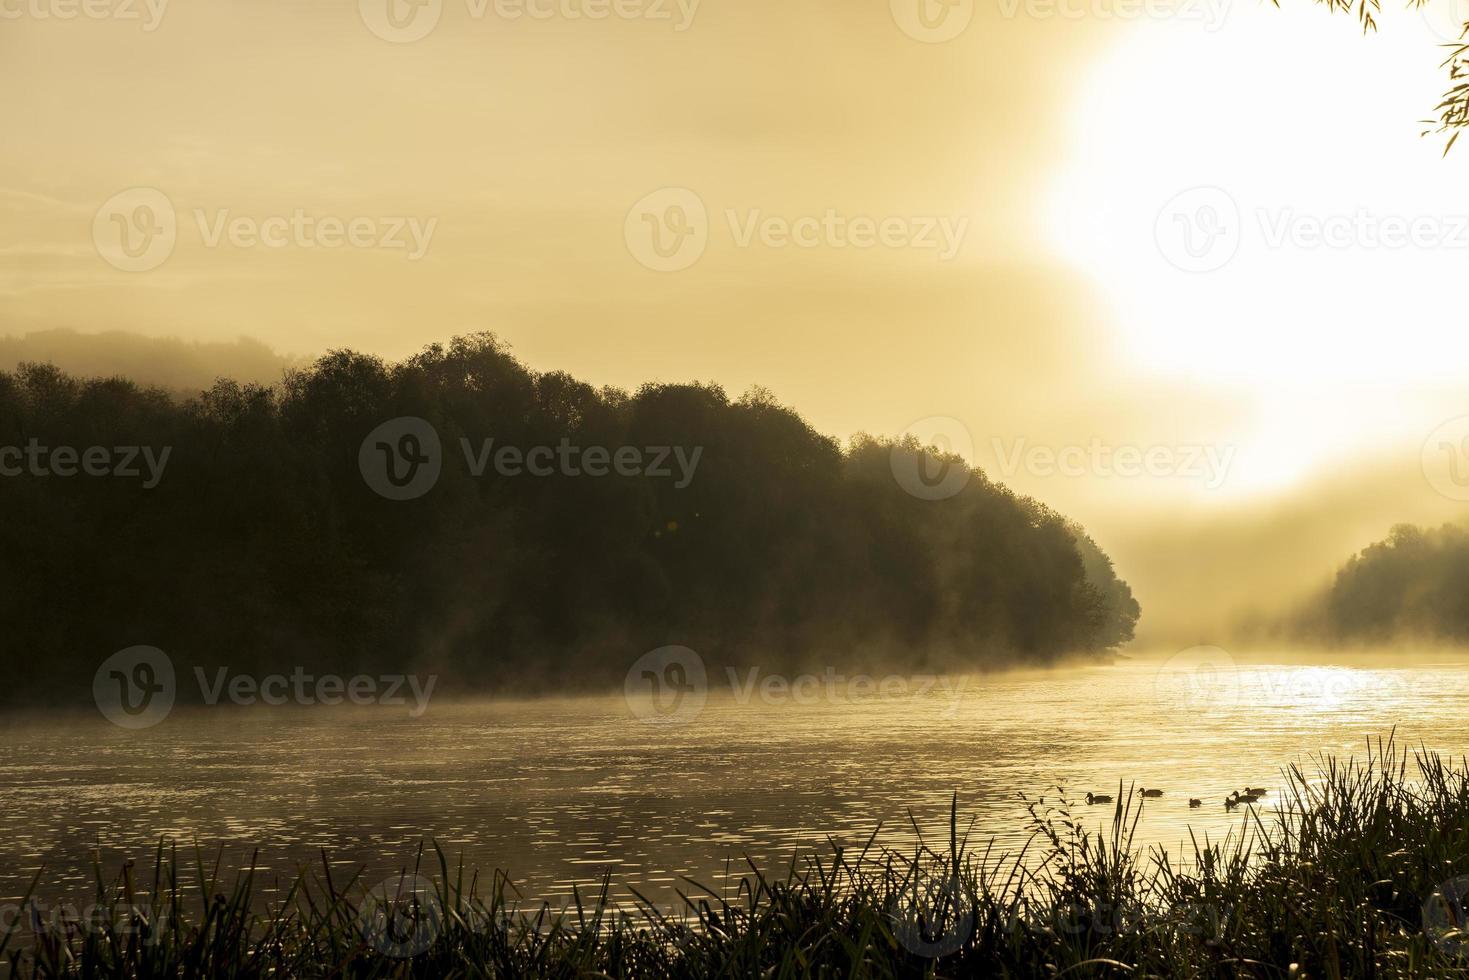 Foggy morning on the river photo